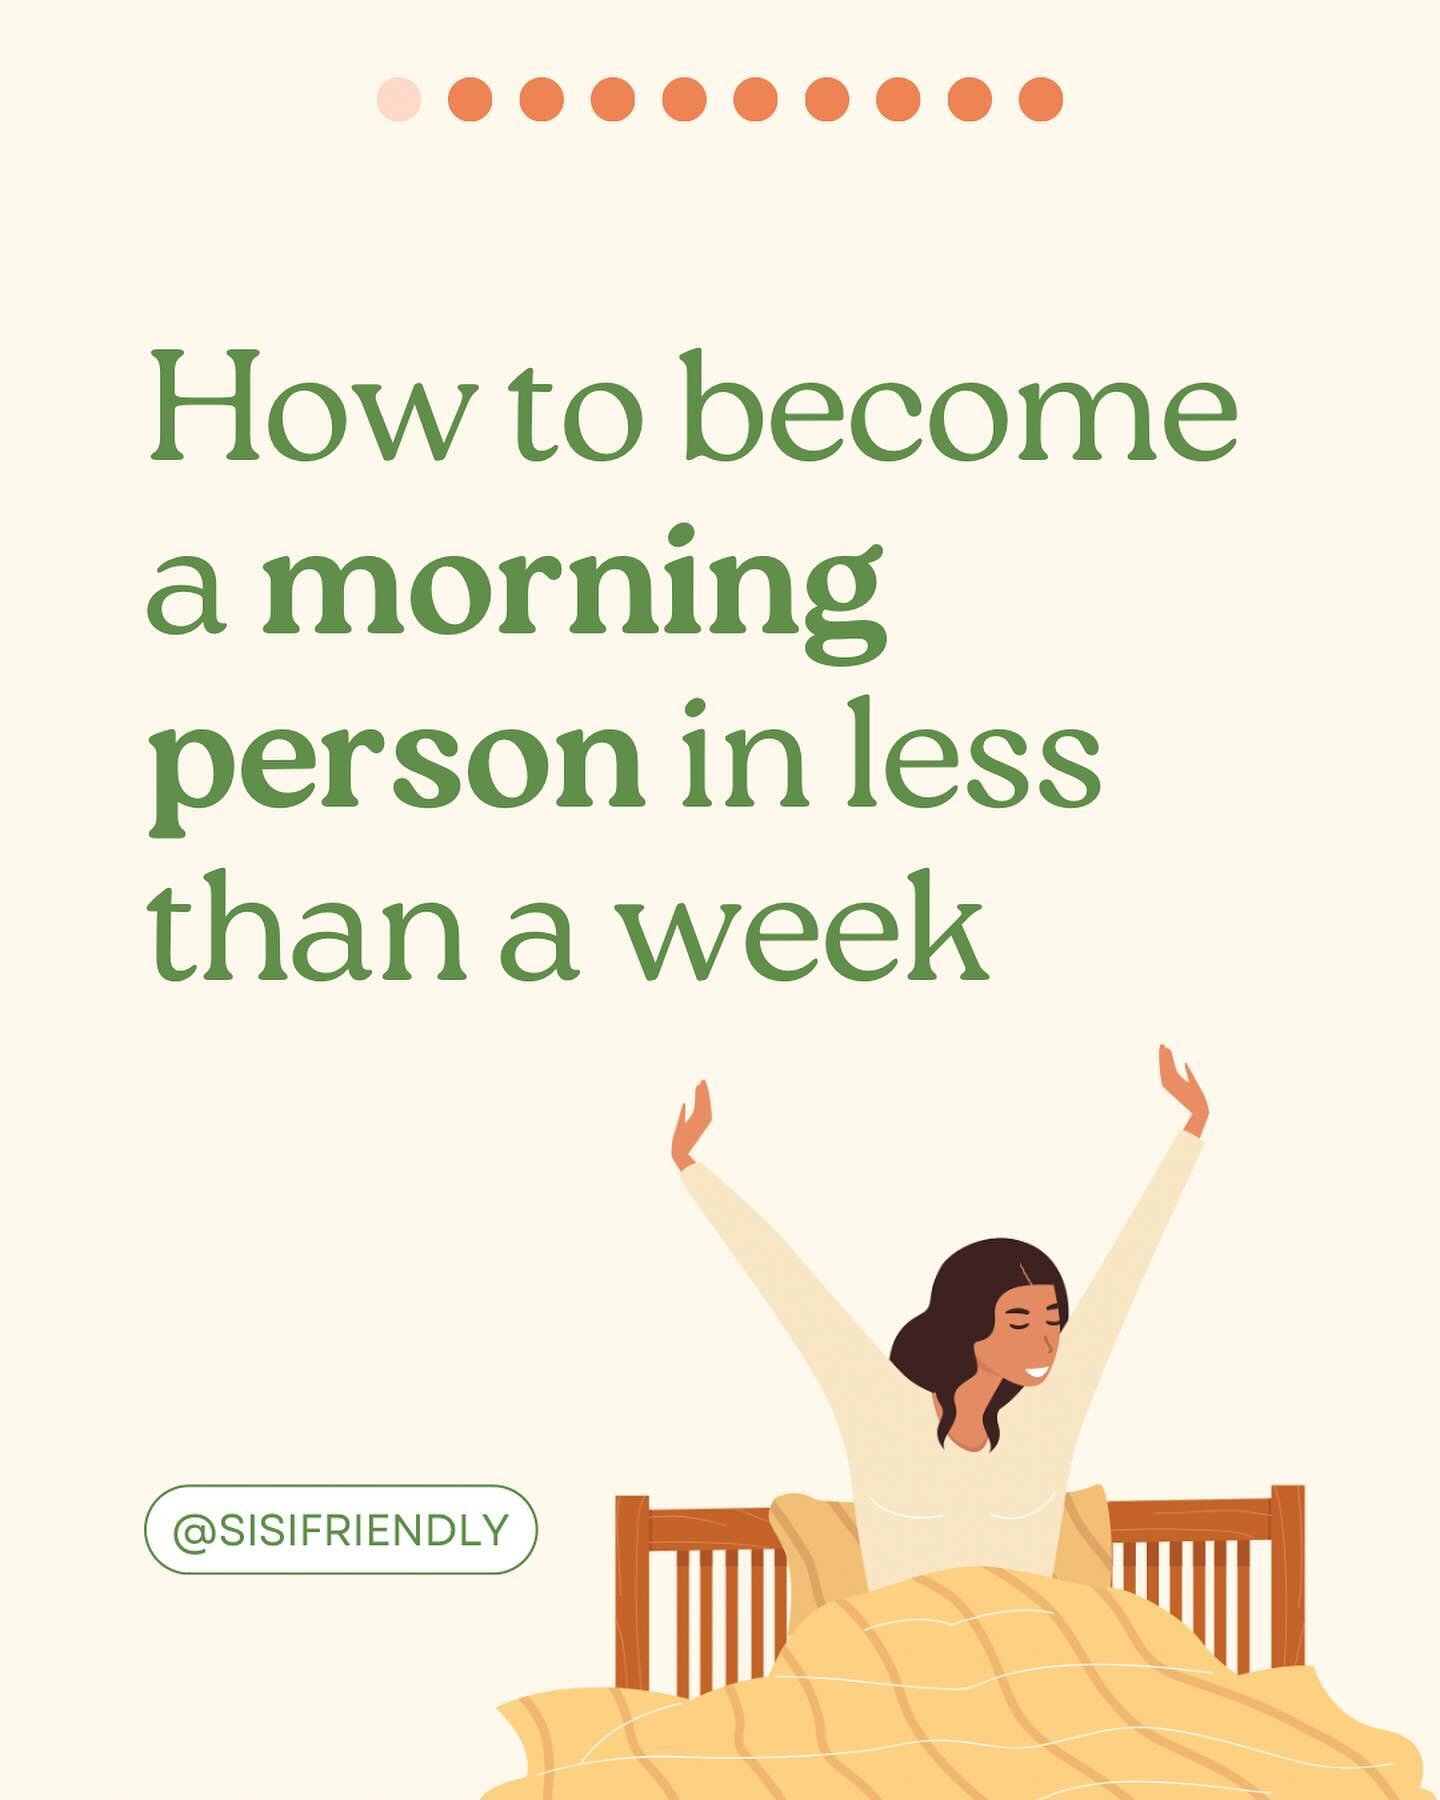 Raise your hand if you&rsquo;re sick and tired of hitting snooze a gazillion times before finally dragging yourself out of bed! 🙋🏻&zwj;♀️🛌 

We&rsquo;ve all been there, right? But what if I told you that you could transform into a morning person i